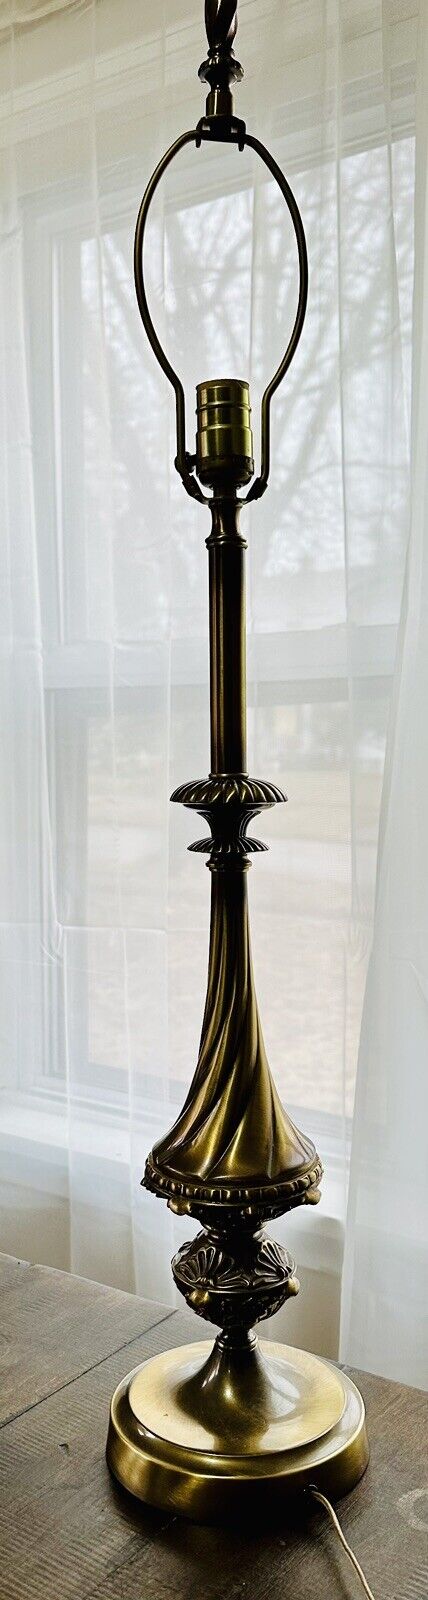 Vintage Large Solid Brass stiffel Table lamp MCM/Art Decco Beautiful Works Great